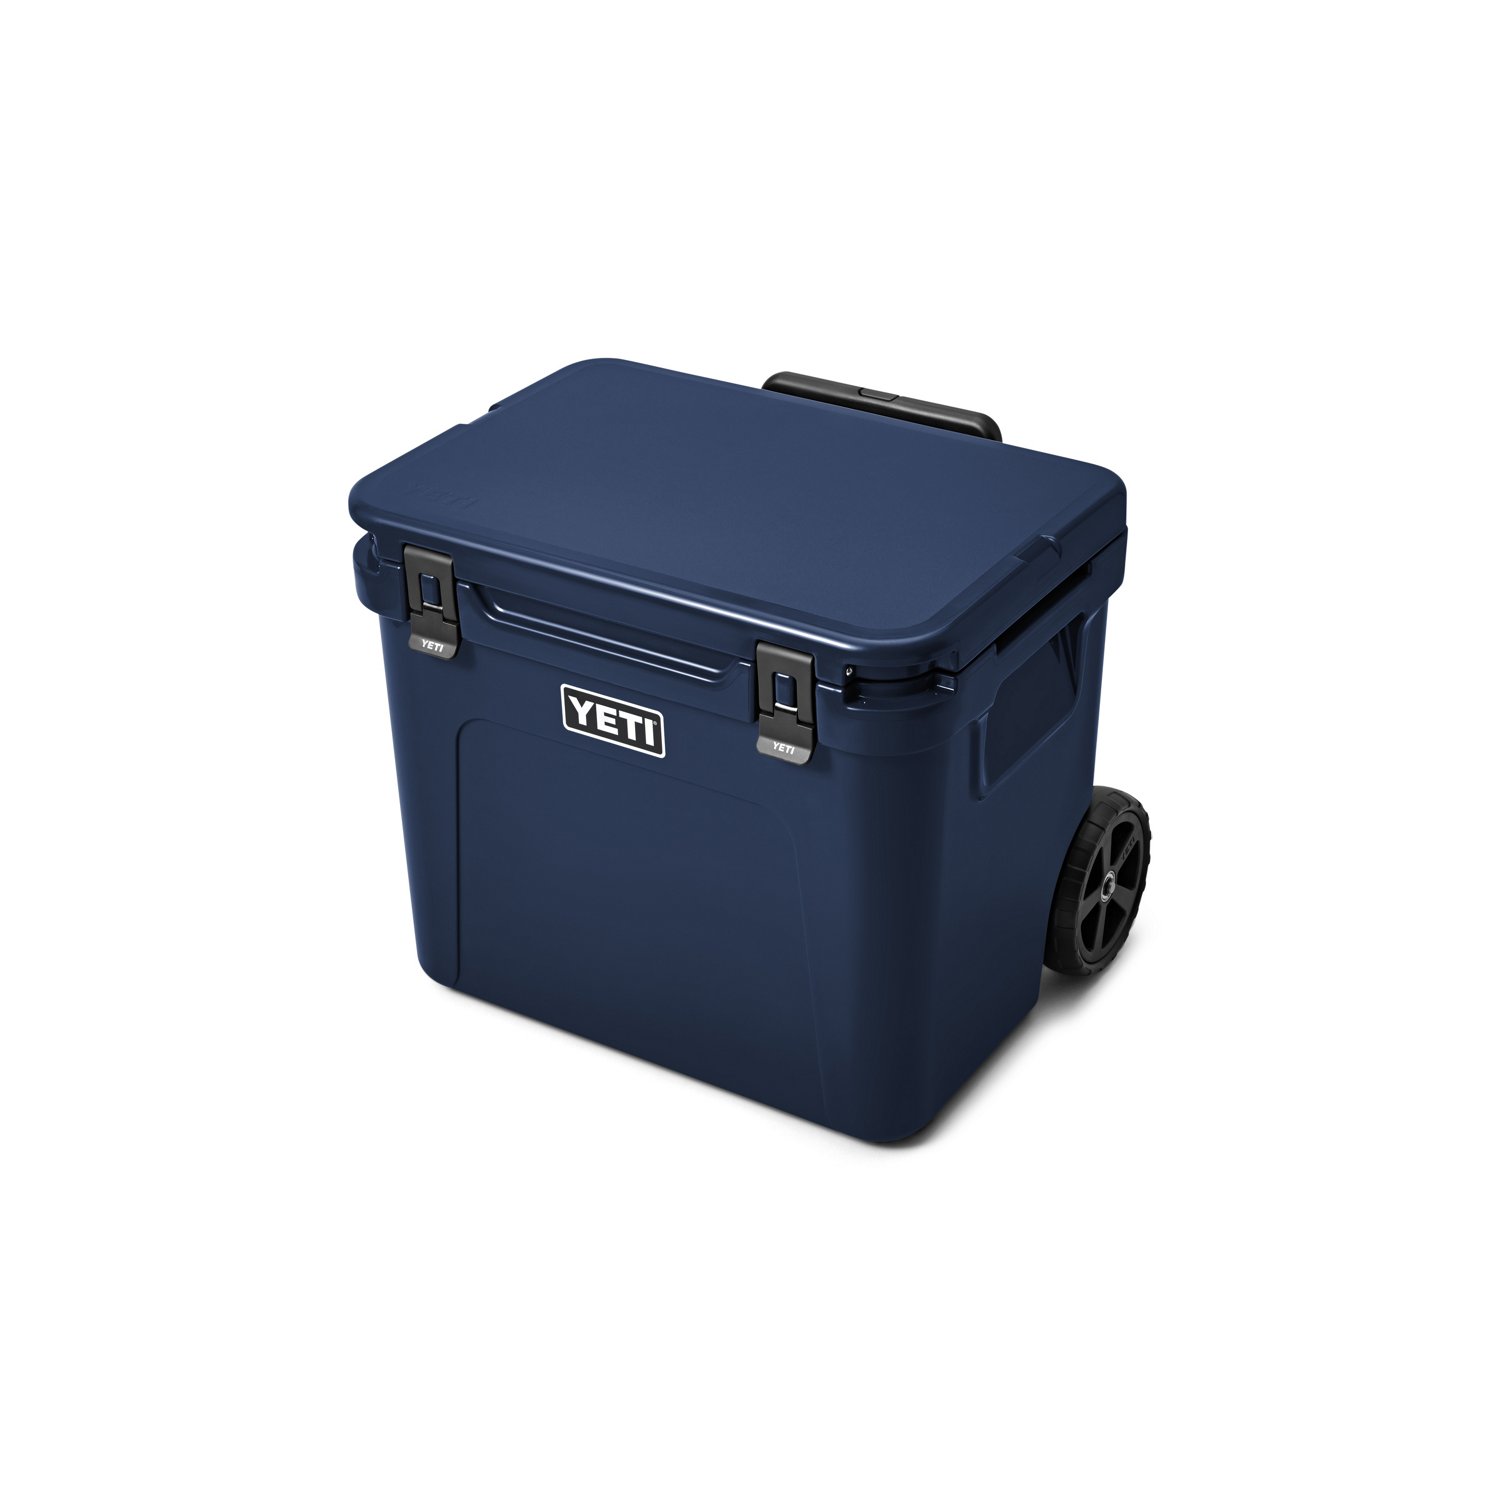 https://academy.scene7.com/is/image/academy///camping/coolers/blue_yeti-roadie-60-wheeled-cooler_10023200000/5652be400cdf42e68da6fa6727fb2fa9?$pdp-mobile-gallery-ng$